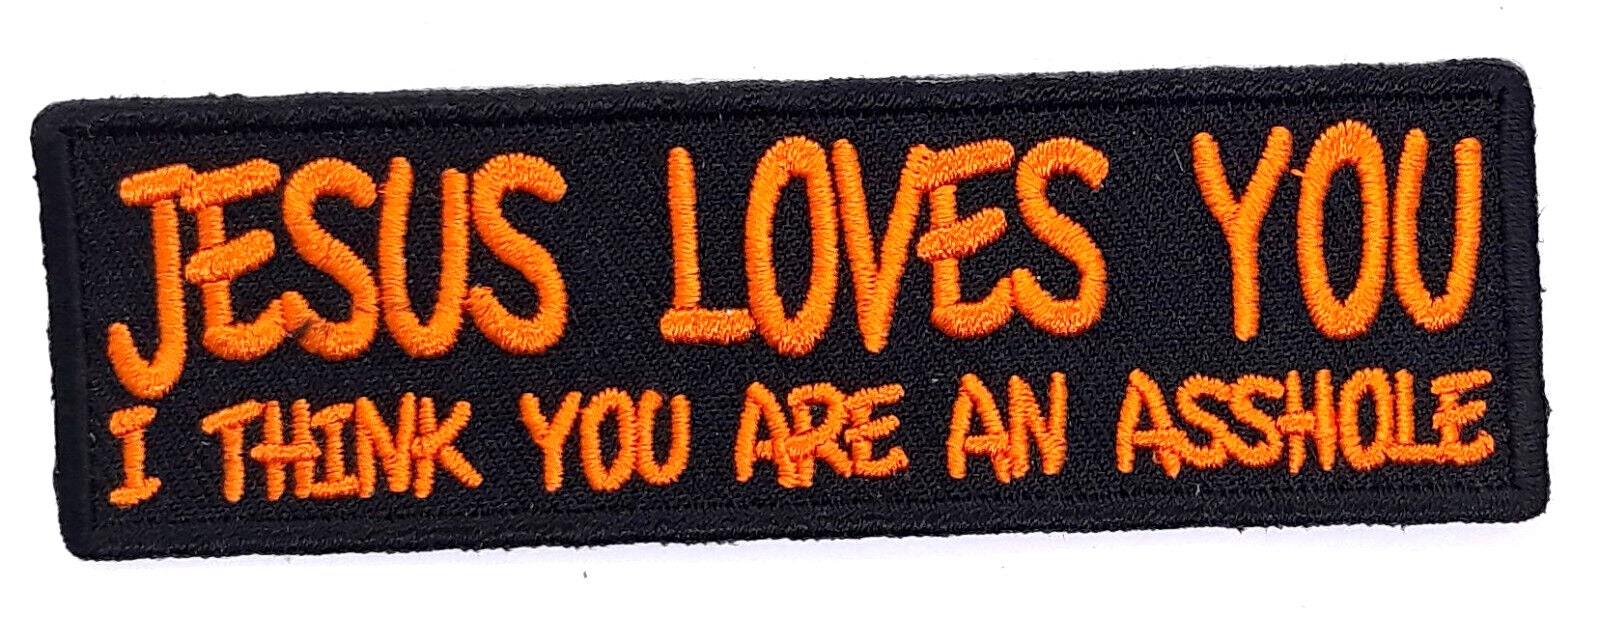 I Think I've Seized The Wrong Day/Owl Patch/Humorous/Funny Patch/Patches  For Sweater/Patches For Jacket/Iron On/Sew On/Embroidered Patch